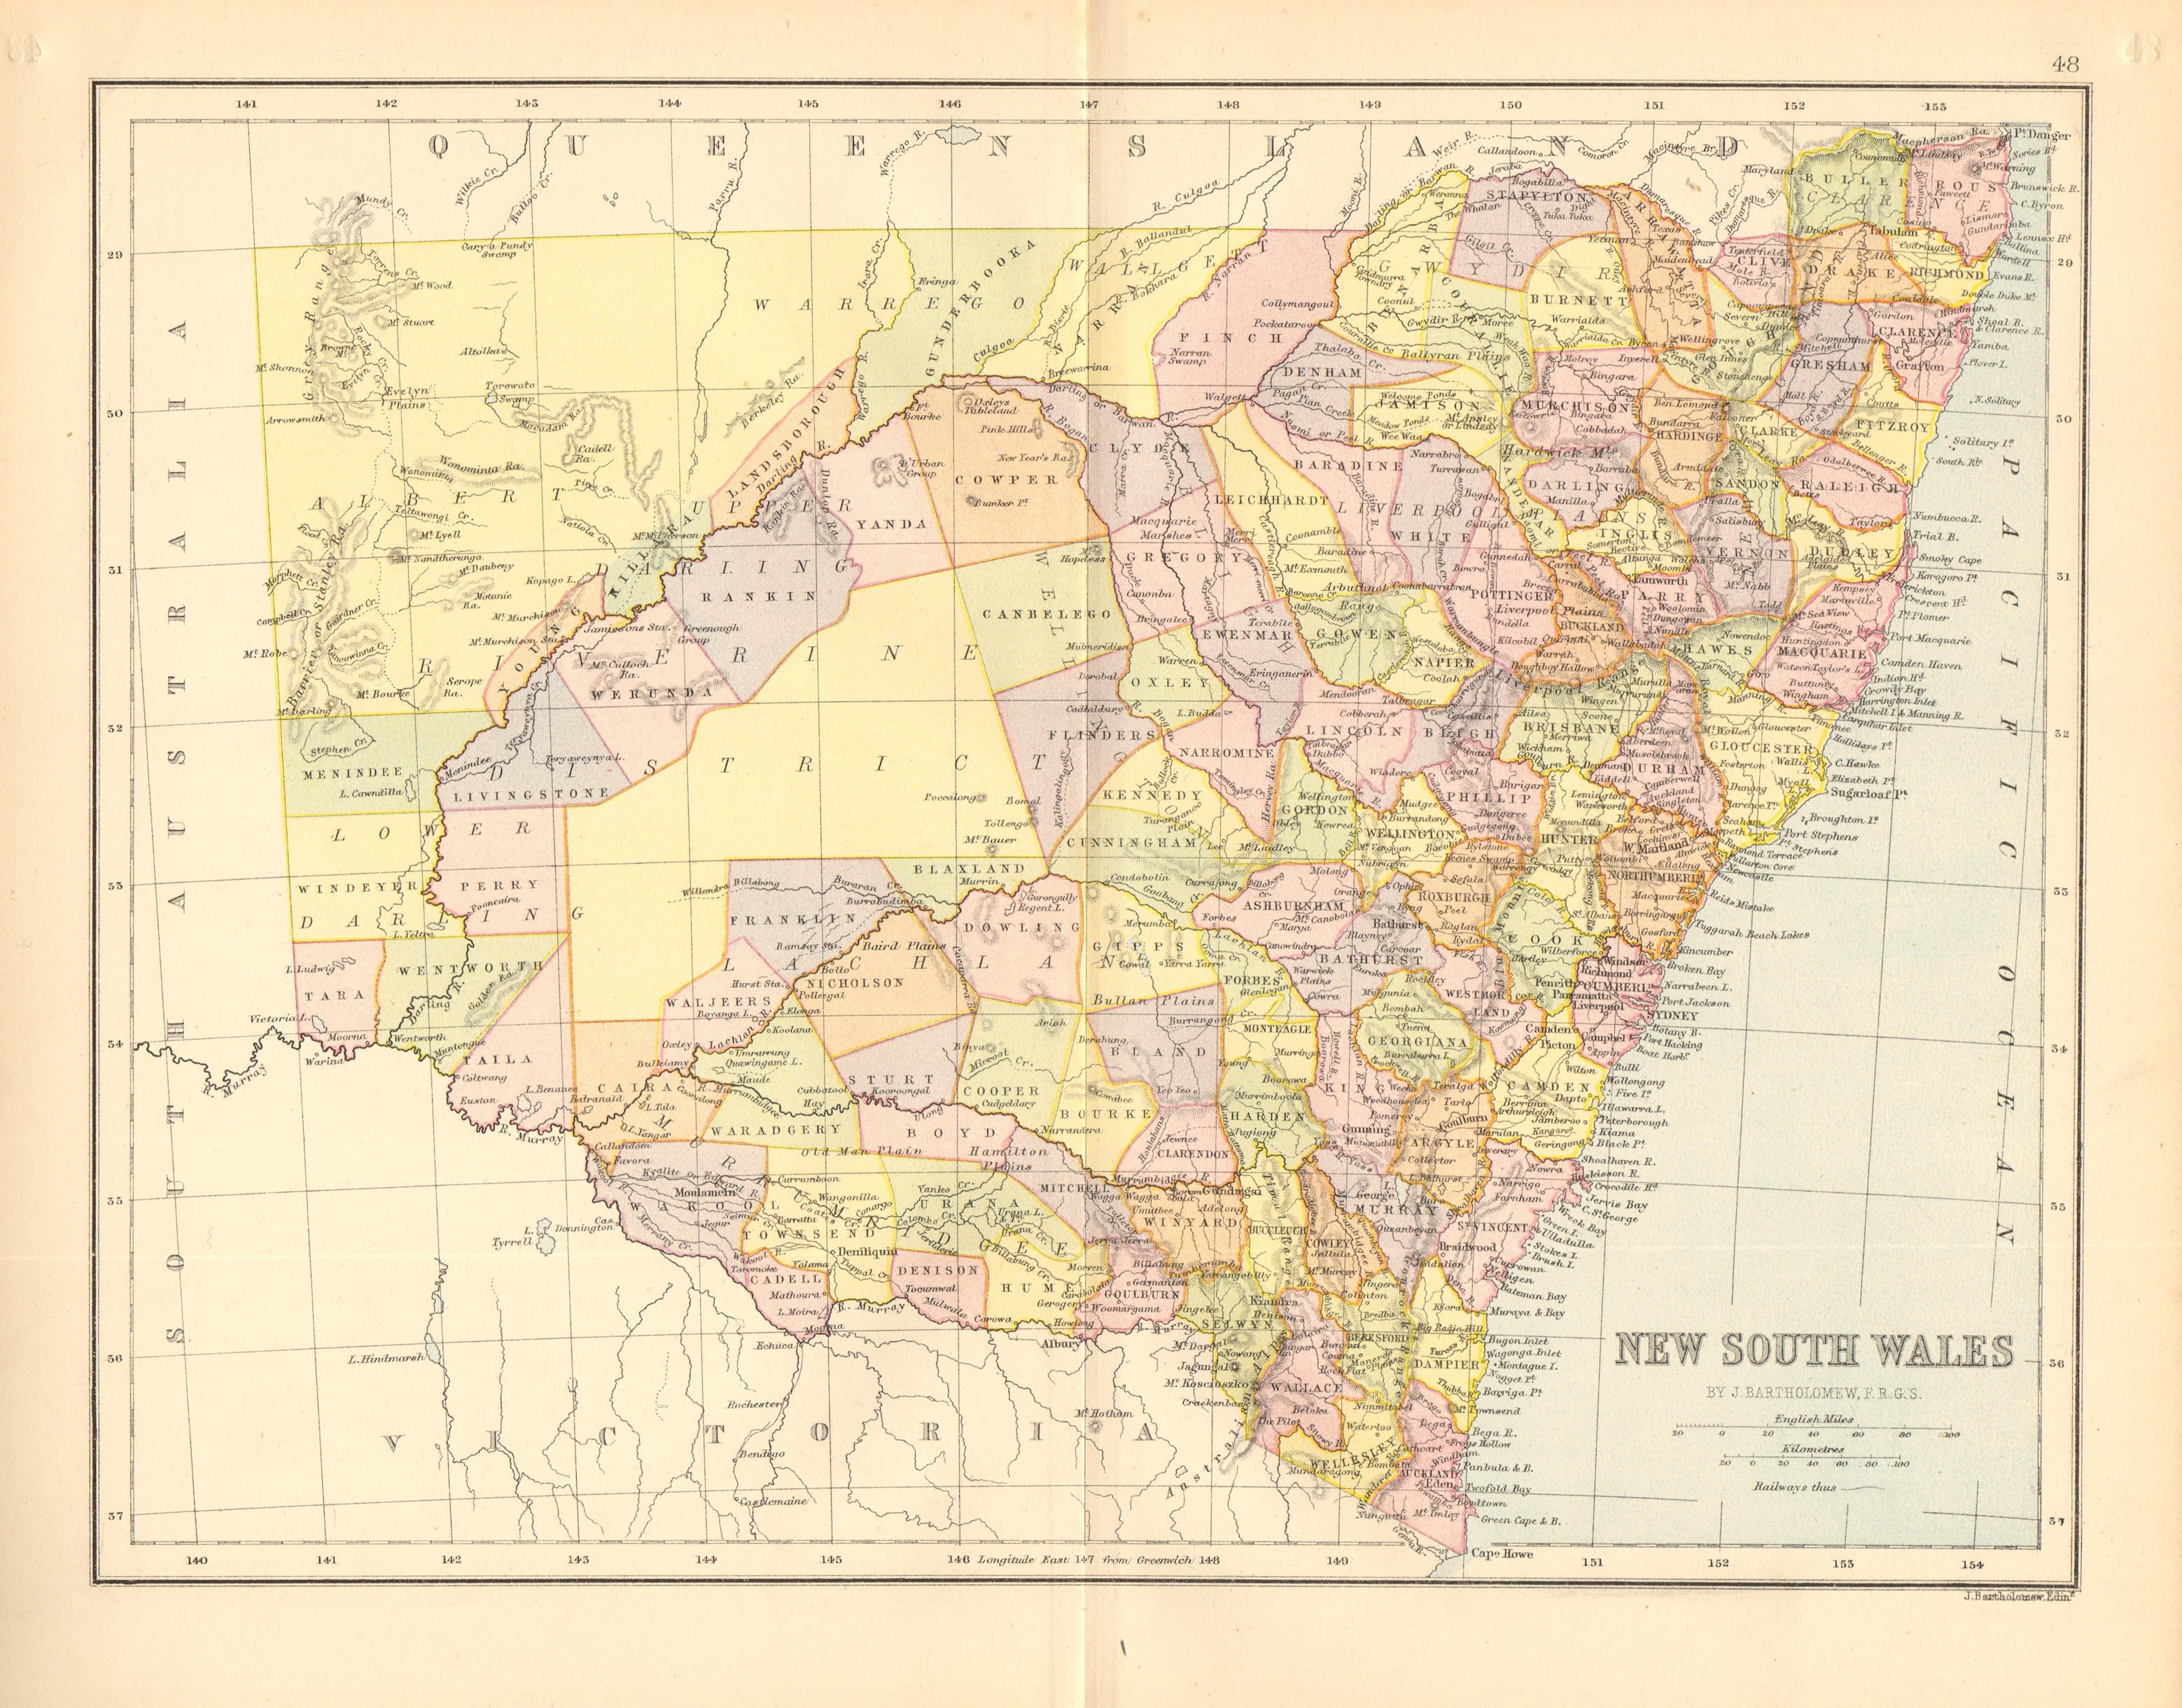 Associate Product NEW SOUTH WALES. State map. Shows counties/districts/railways. Australia 1876